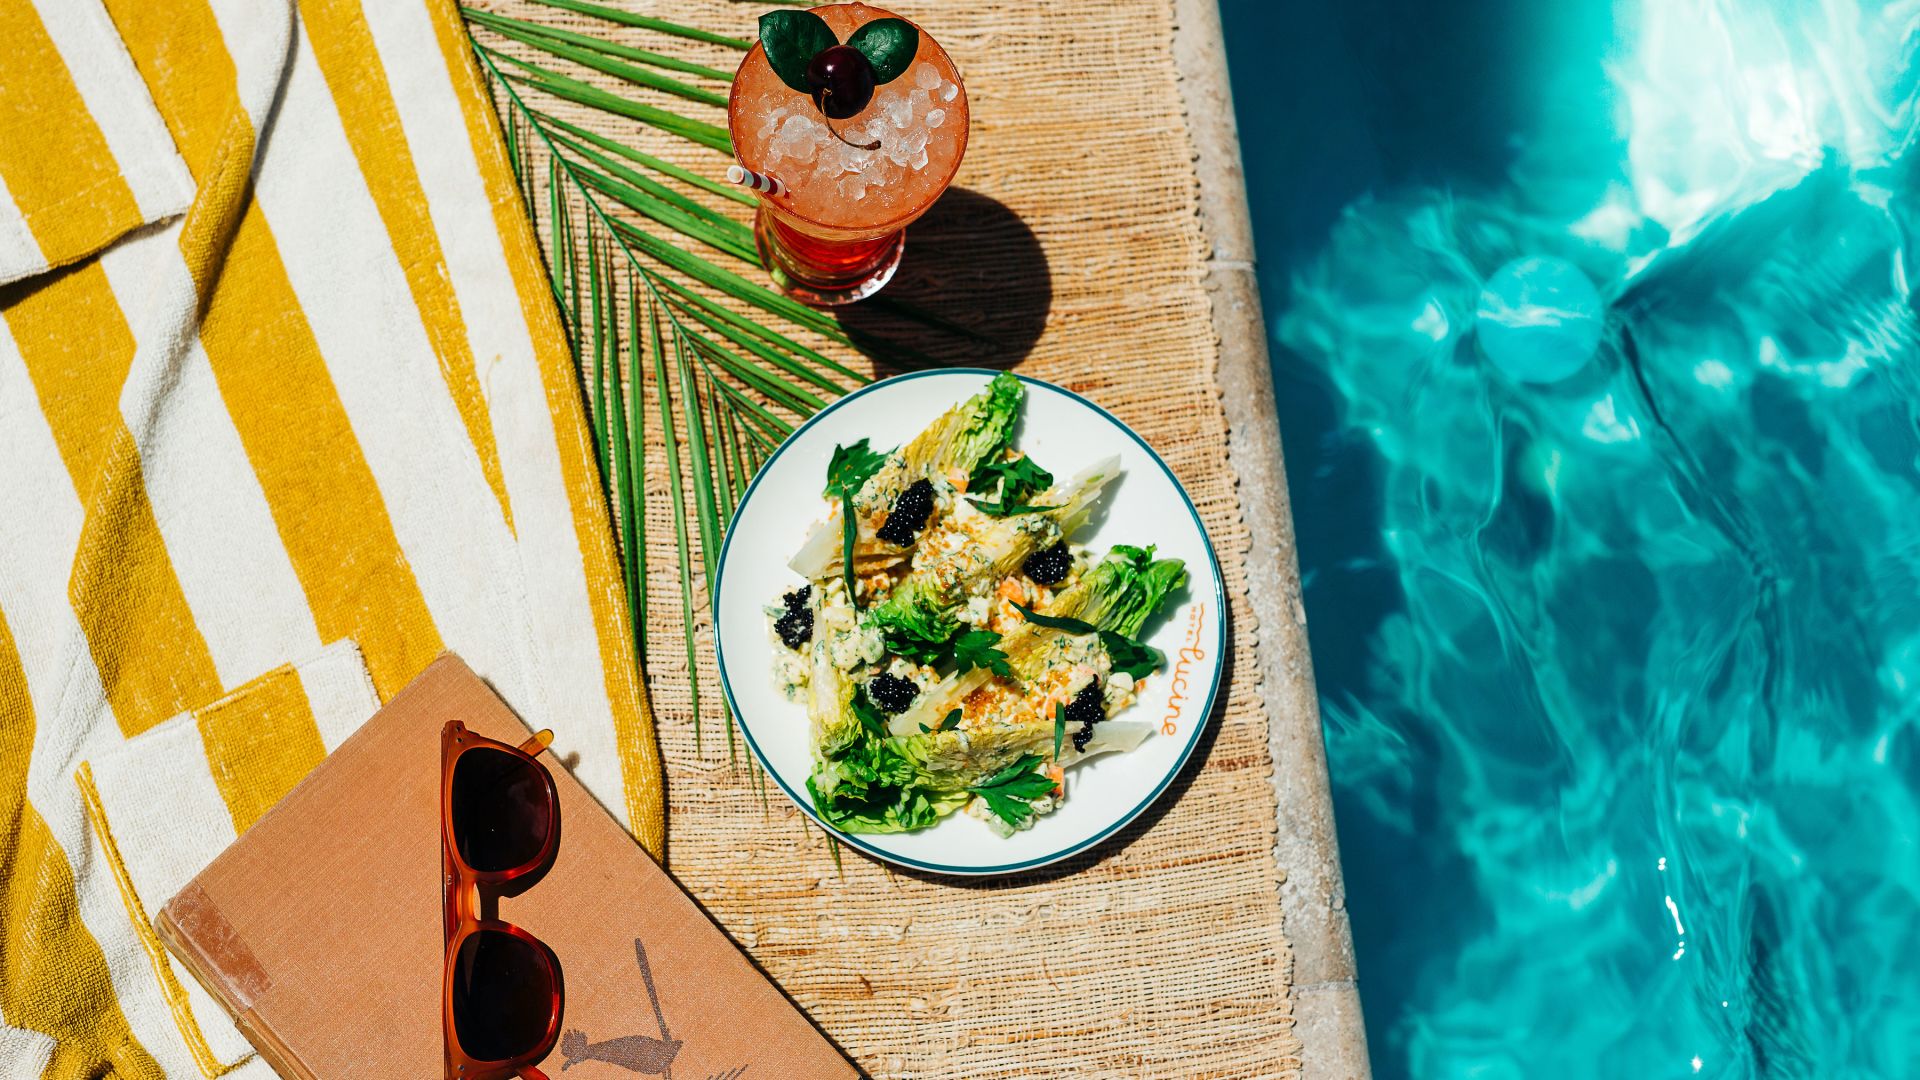 A Plate Of Food Next To A Pool